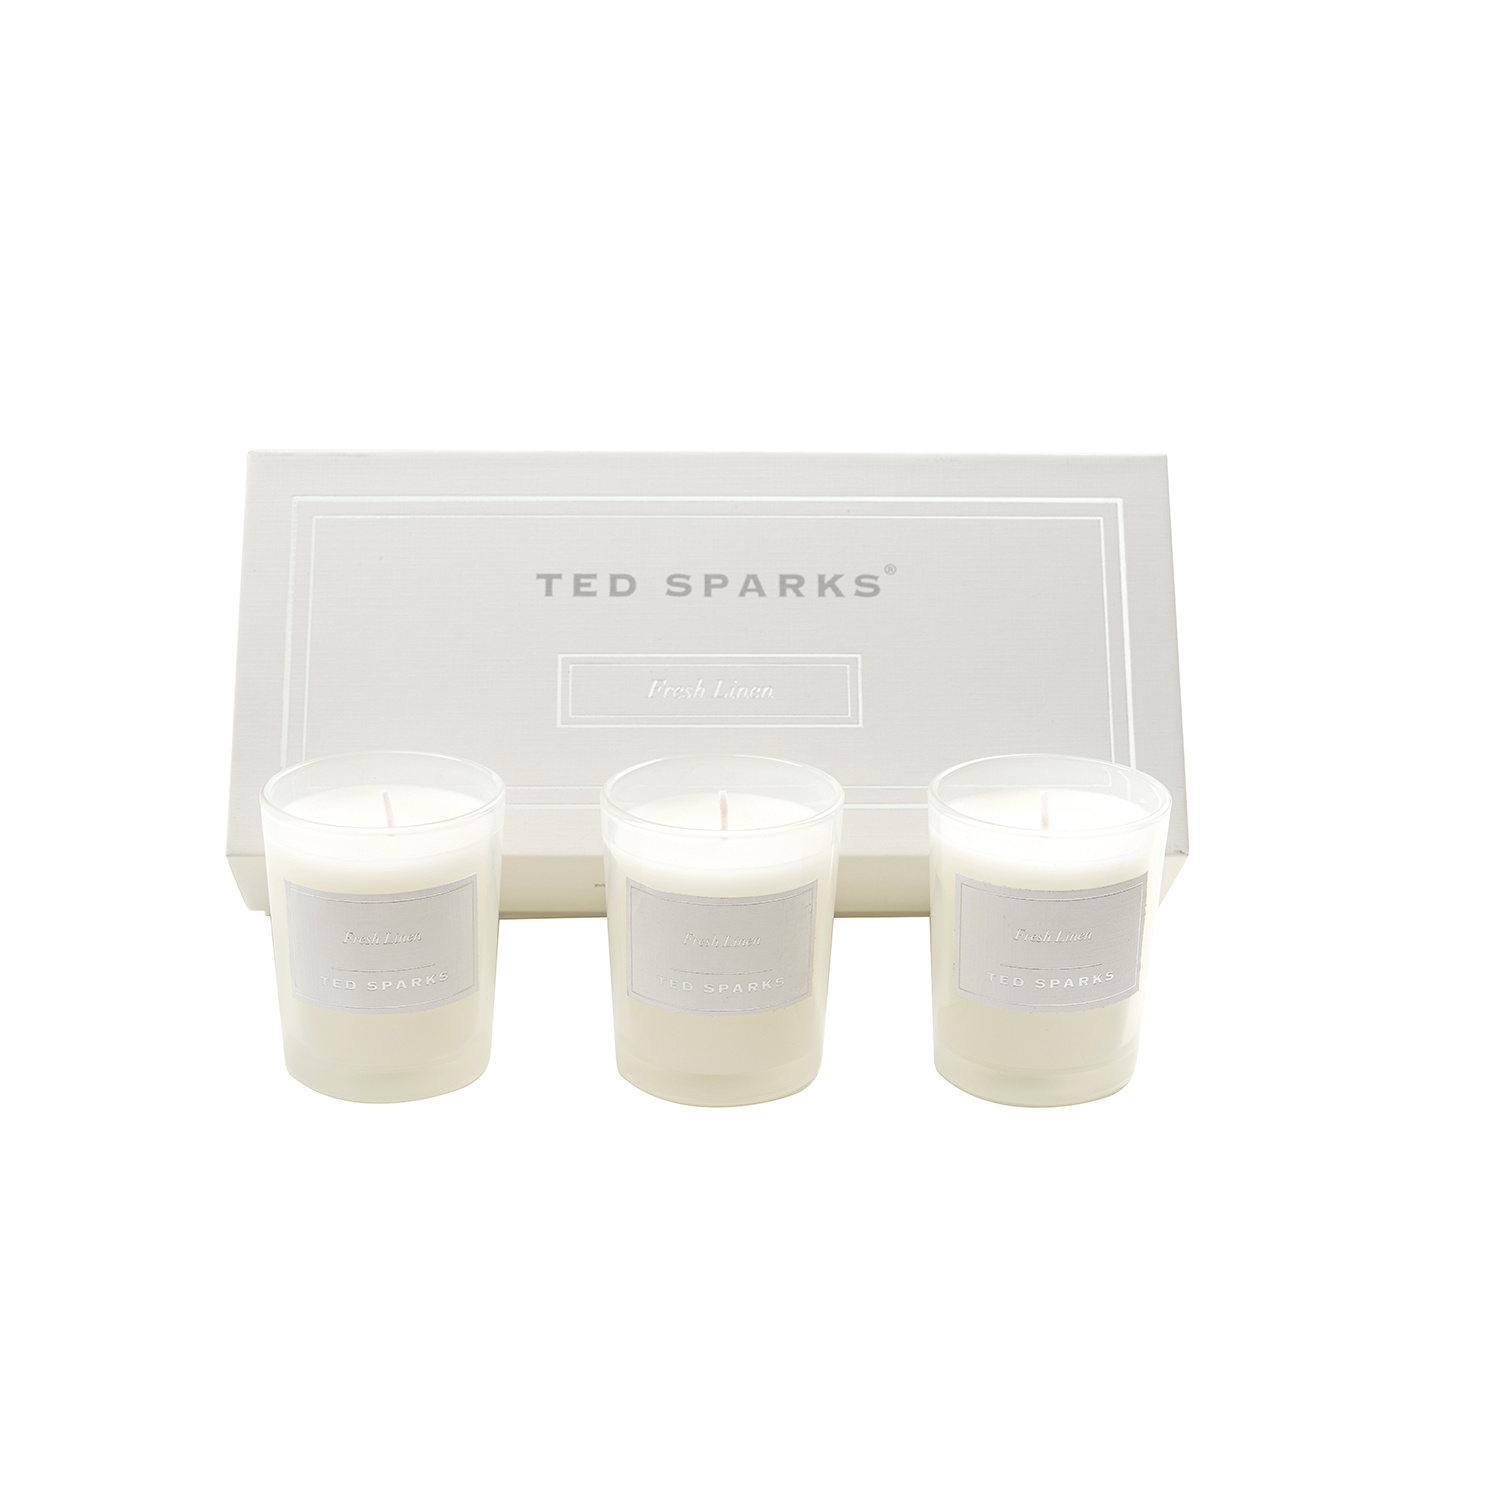 Ted Sparks Fresh Linen Mini Candle Gift Set